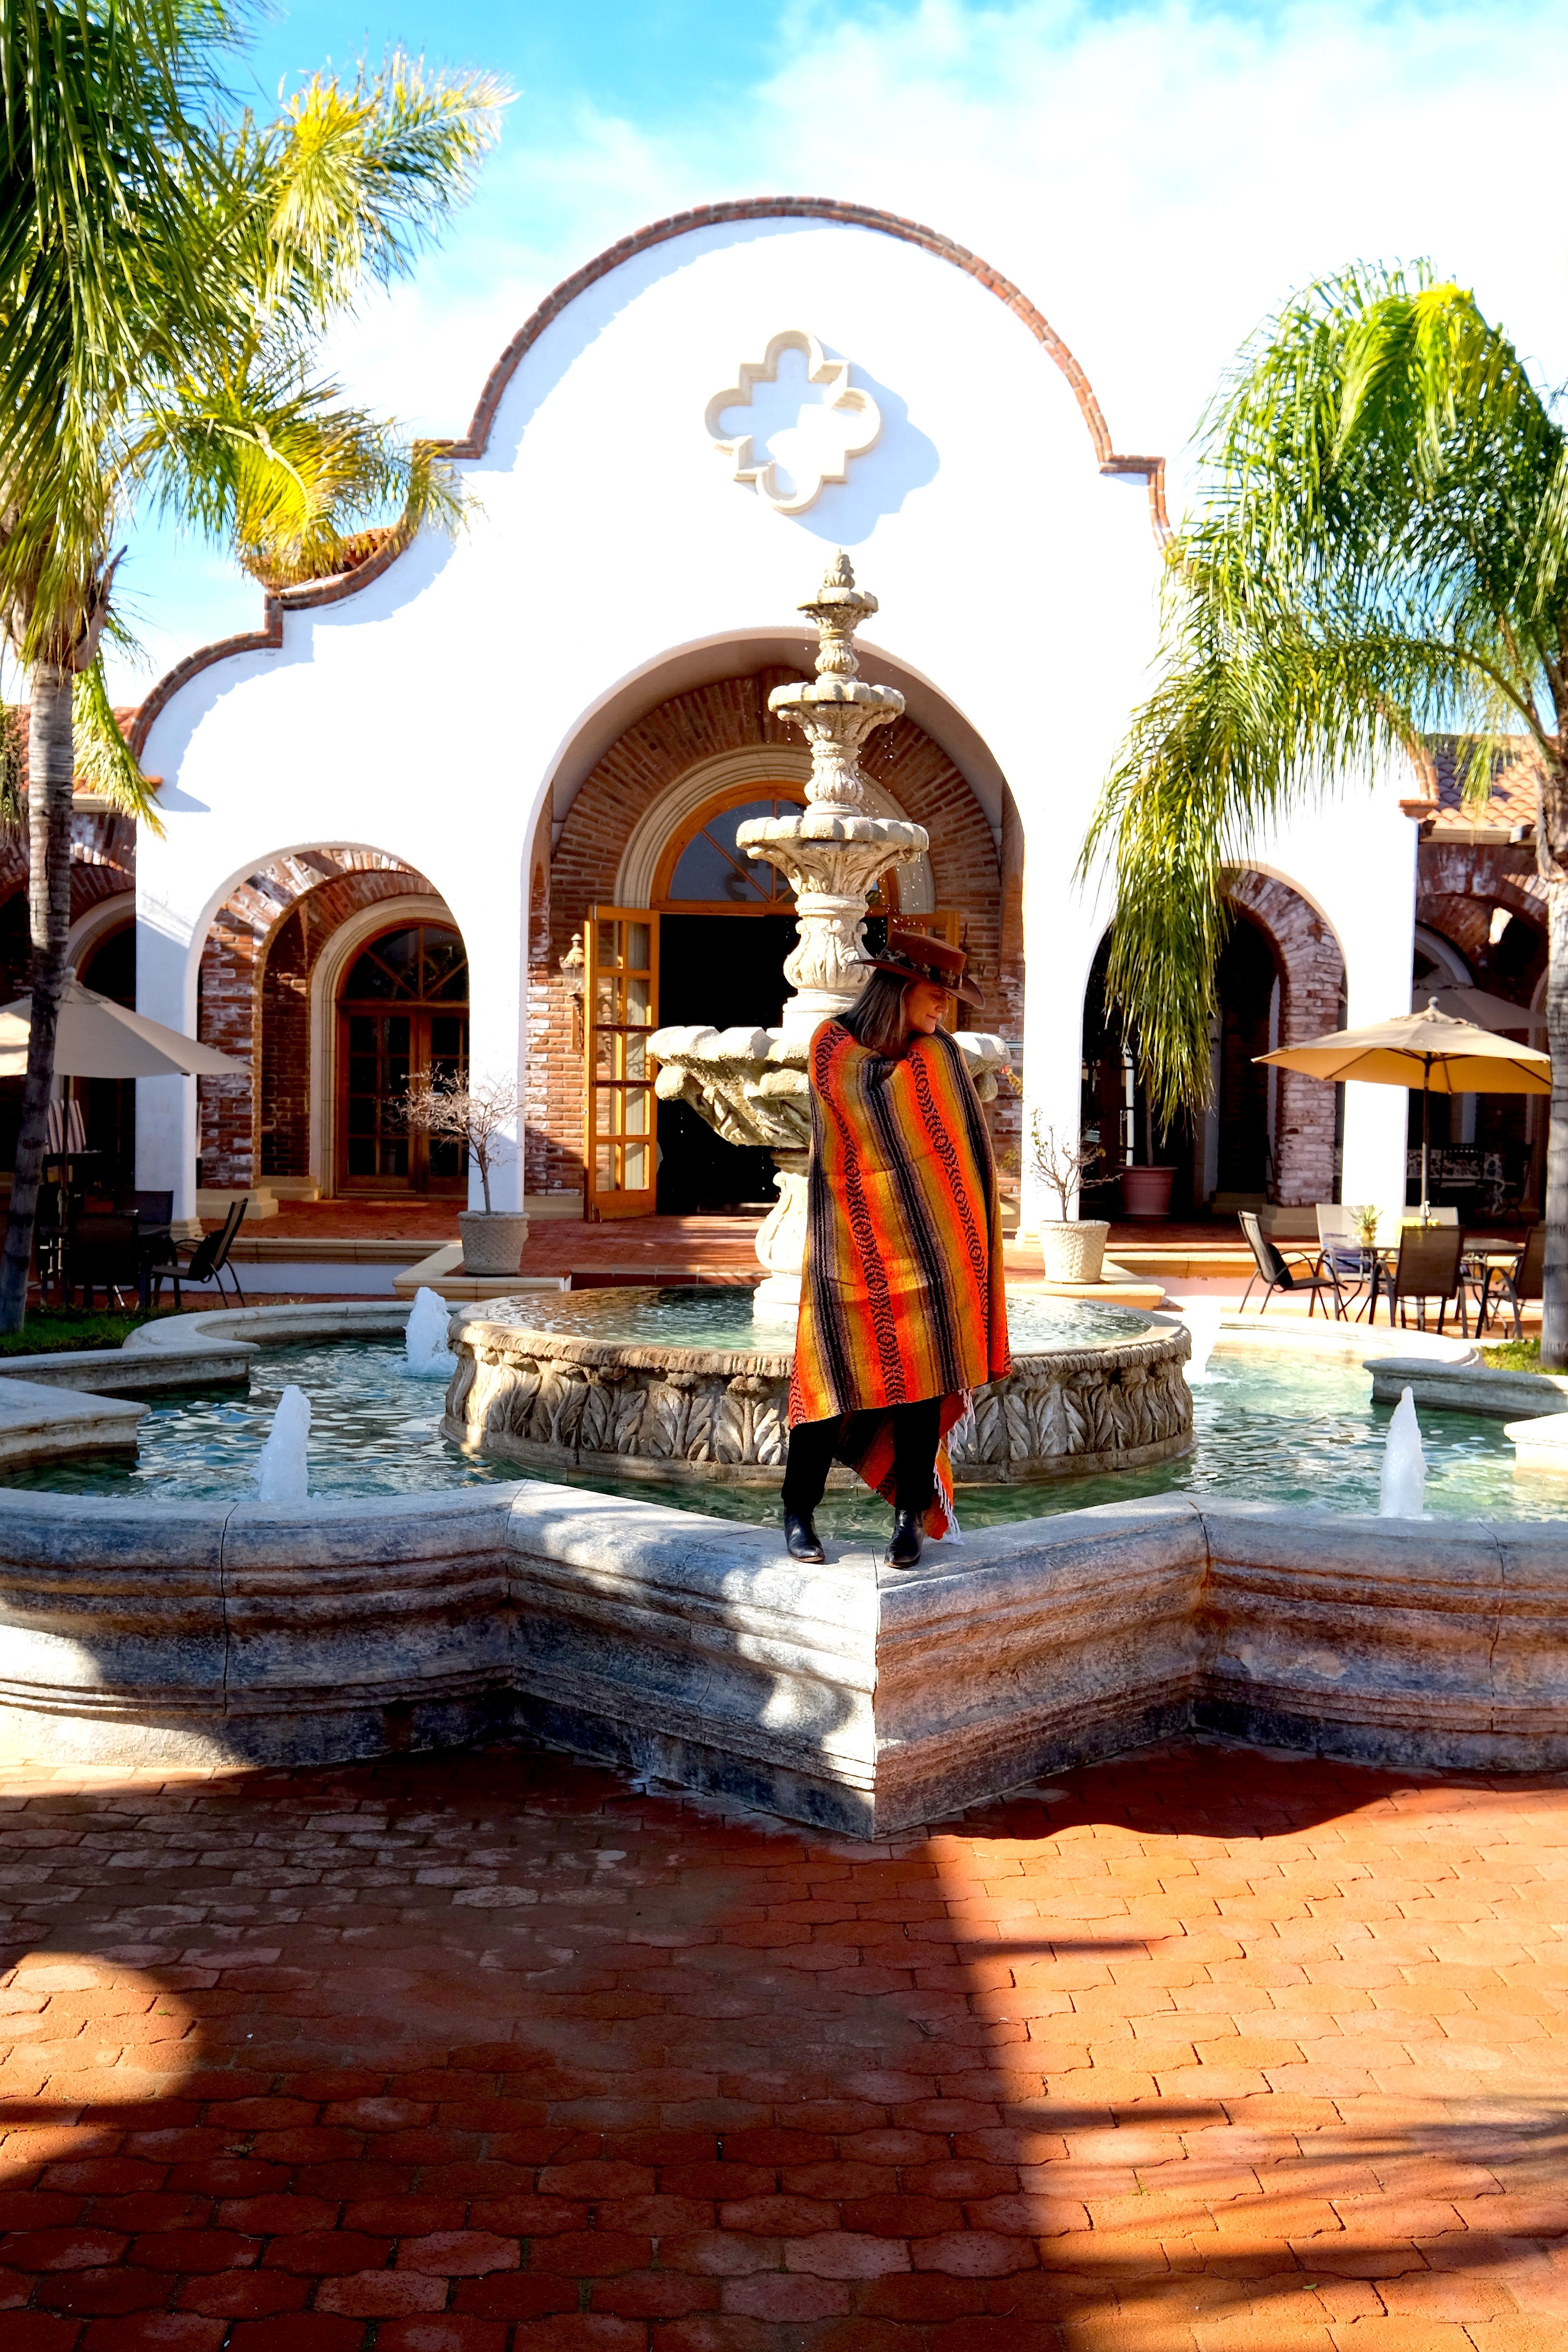 Fountain at Adobe Guadalupe in Baja Mexico